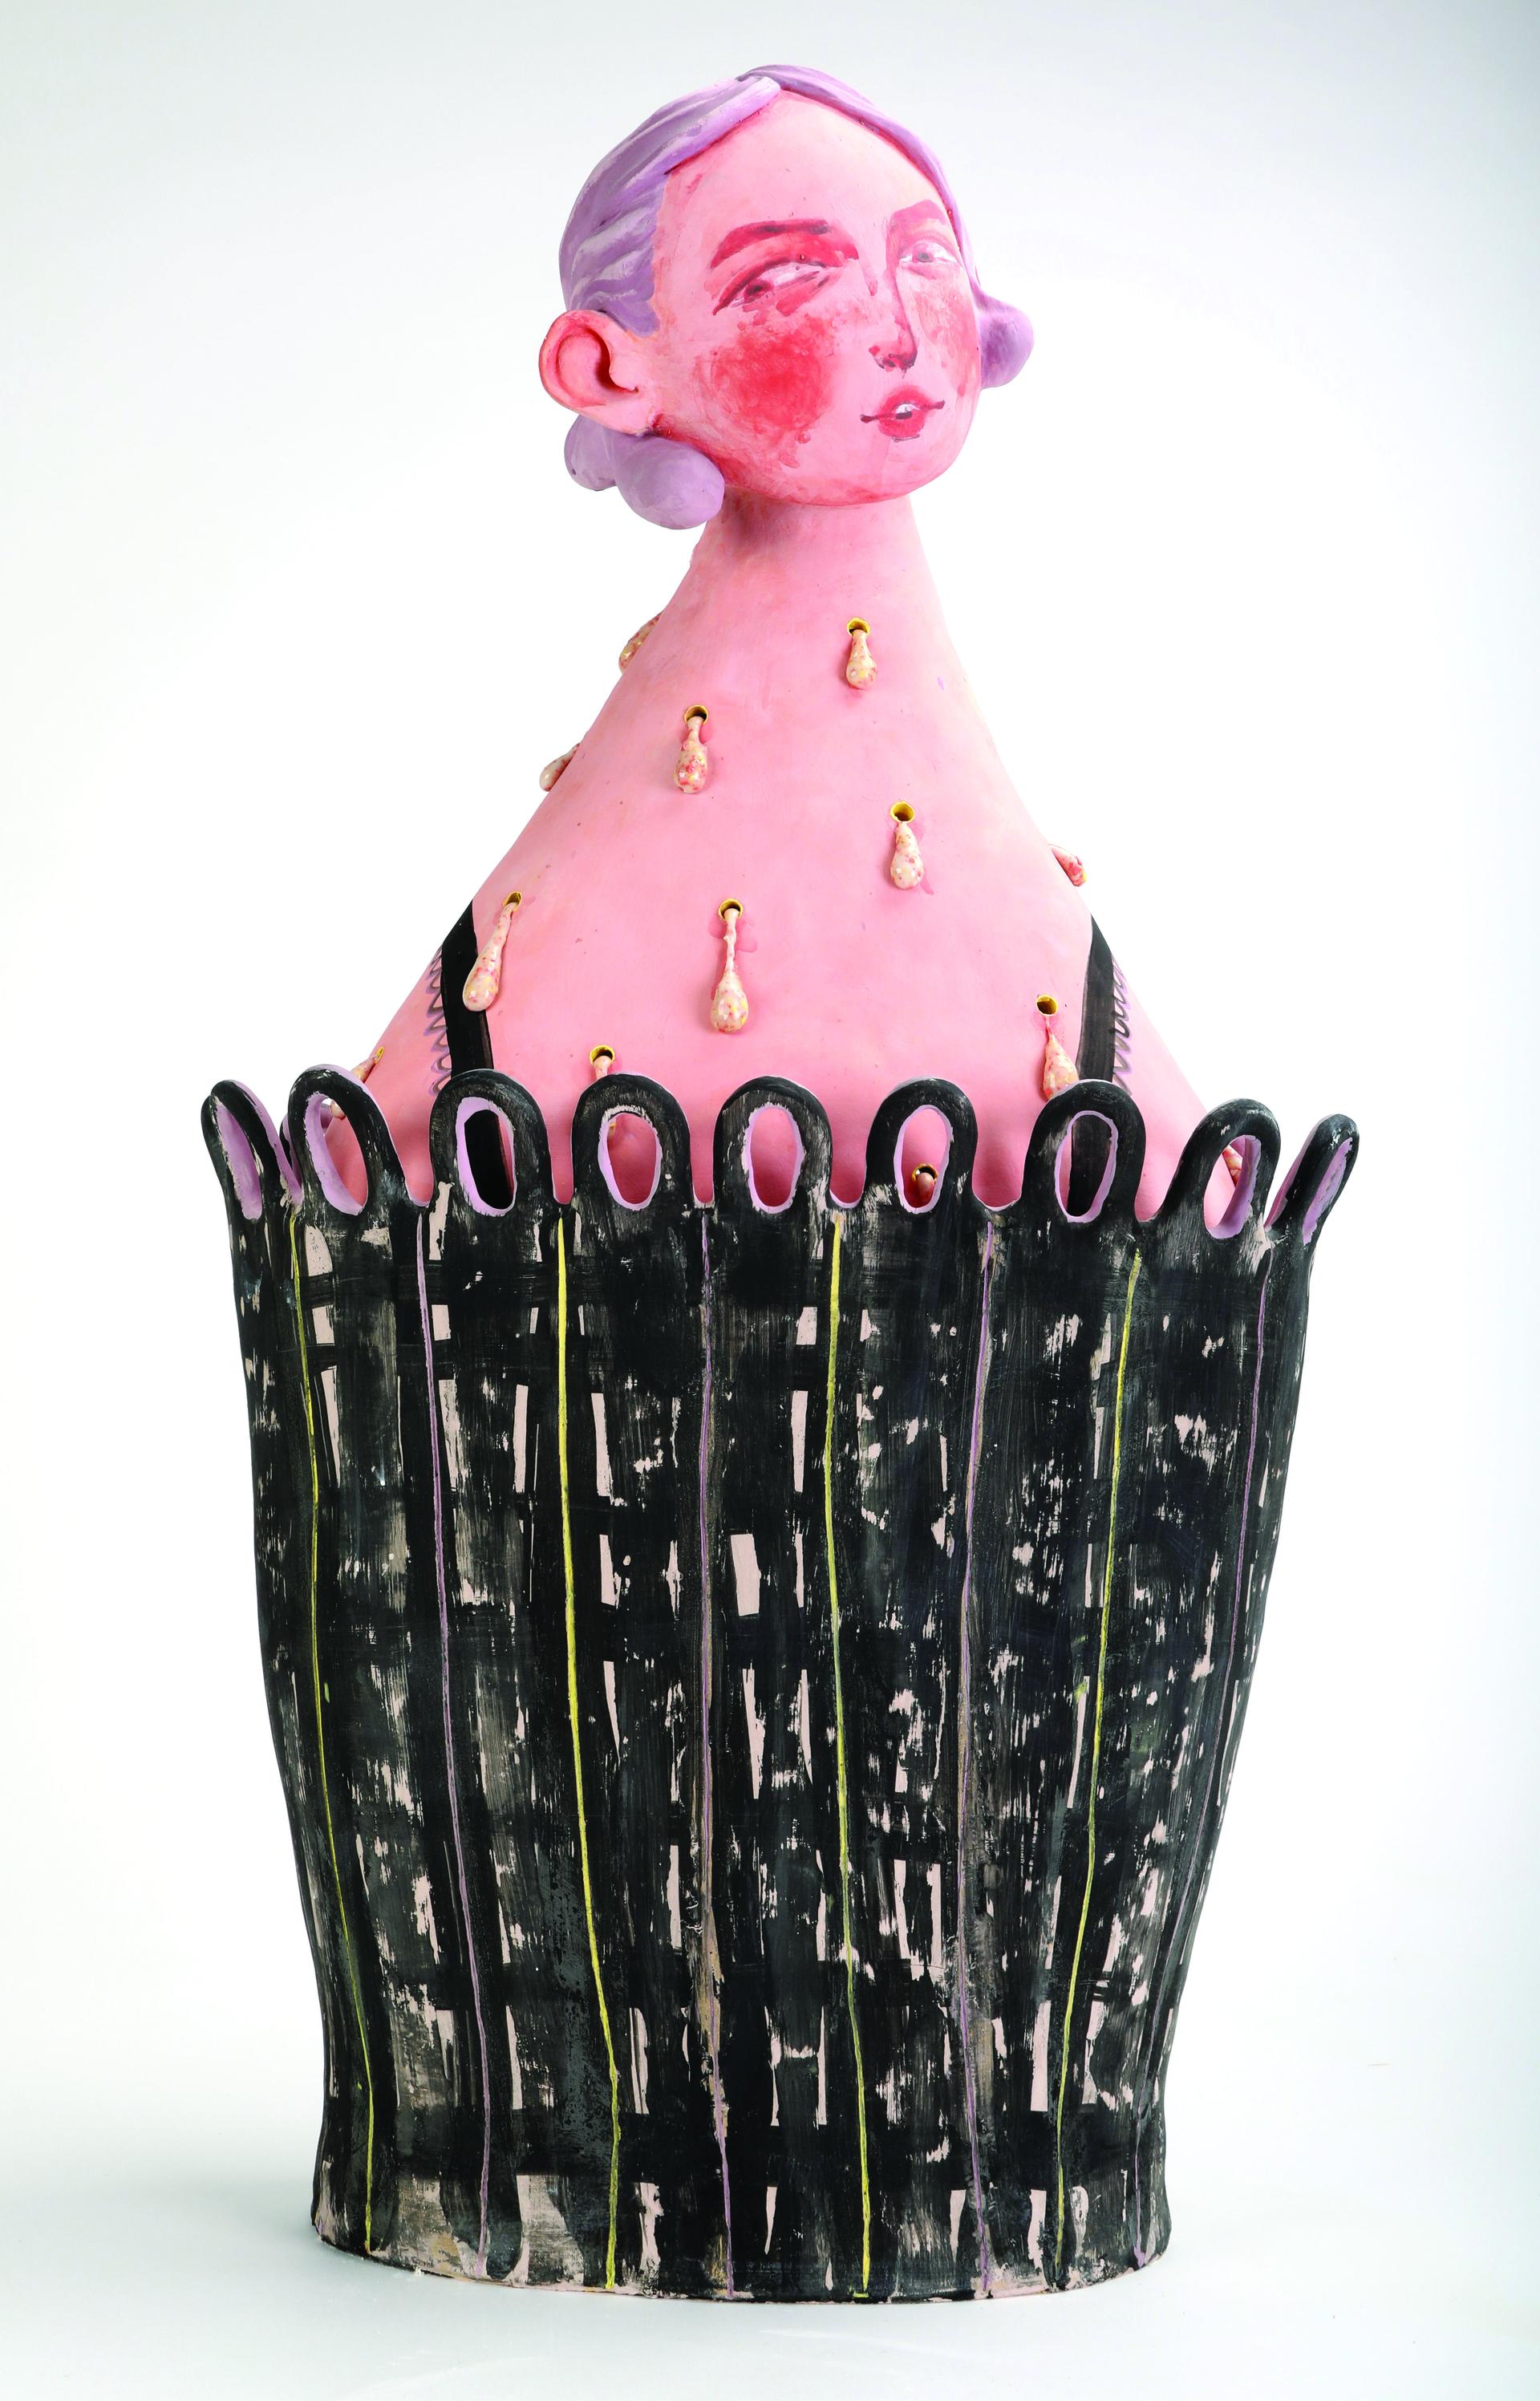 A ceramic figure with pink skin, purple hair, and a "knowing" expression.